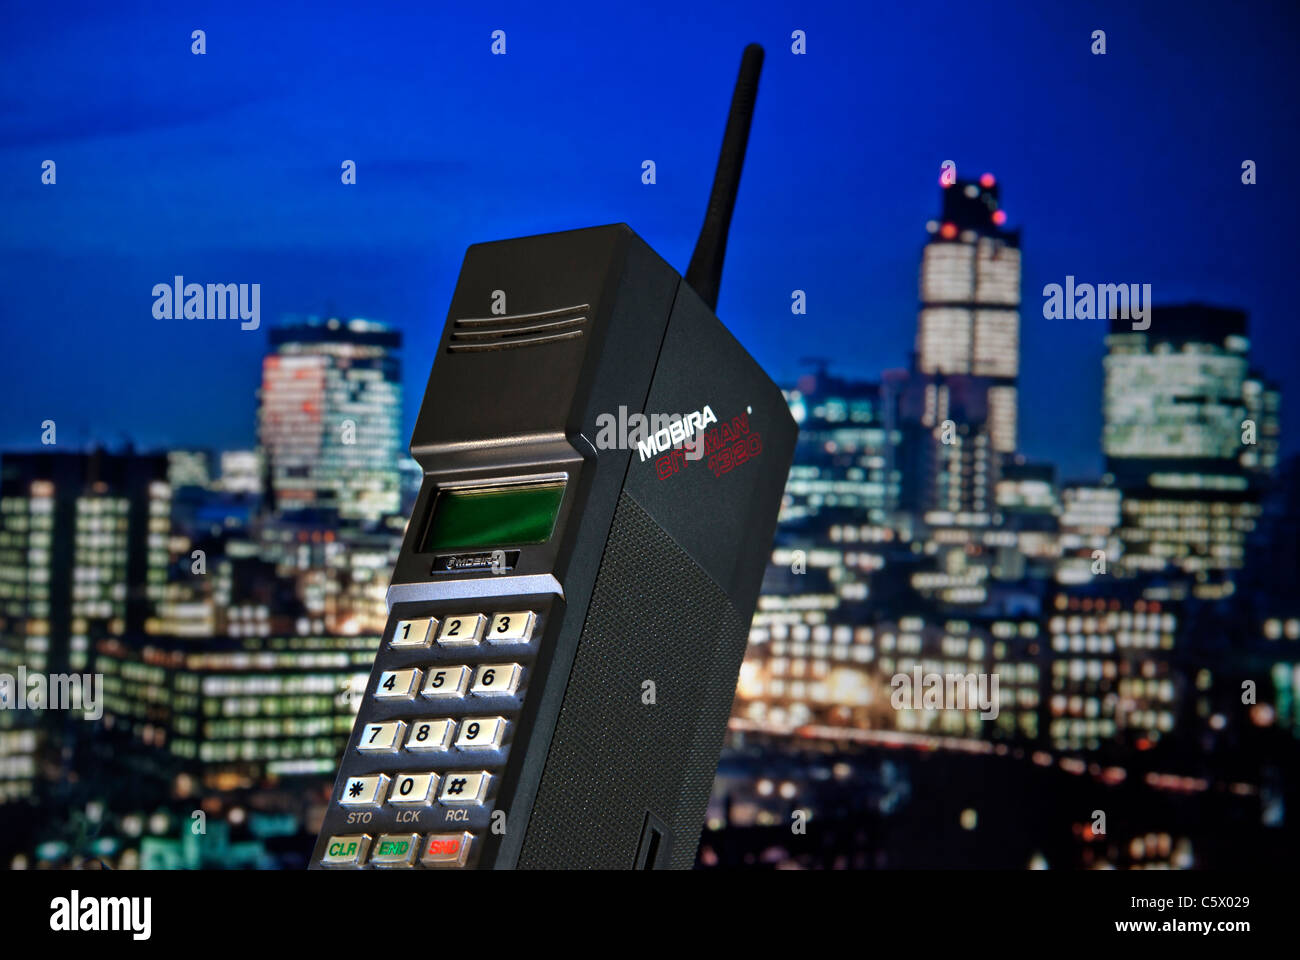 1980’s Mobile Cell Phone MOBIRA CITYMAN 1987 First generation early hand held mobile cell phone Mobira Cityman 1320 launched 1987, with 80’s contemporaneous 1987 London financial city skyline lit at dusk behind including Nat West Tower LONDON CITY Stock Photo